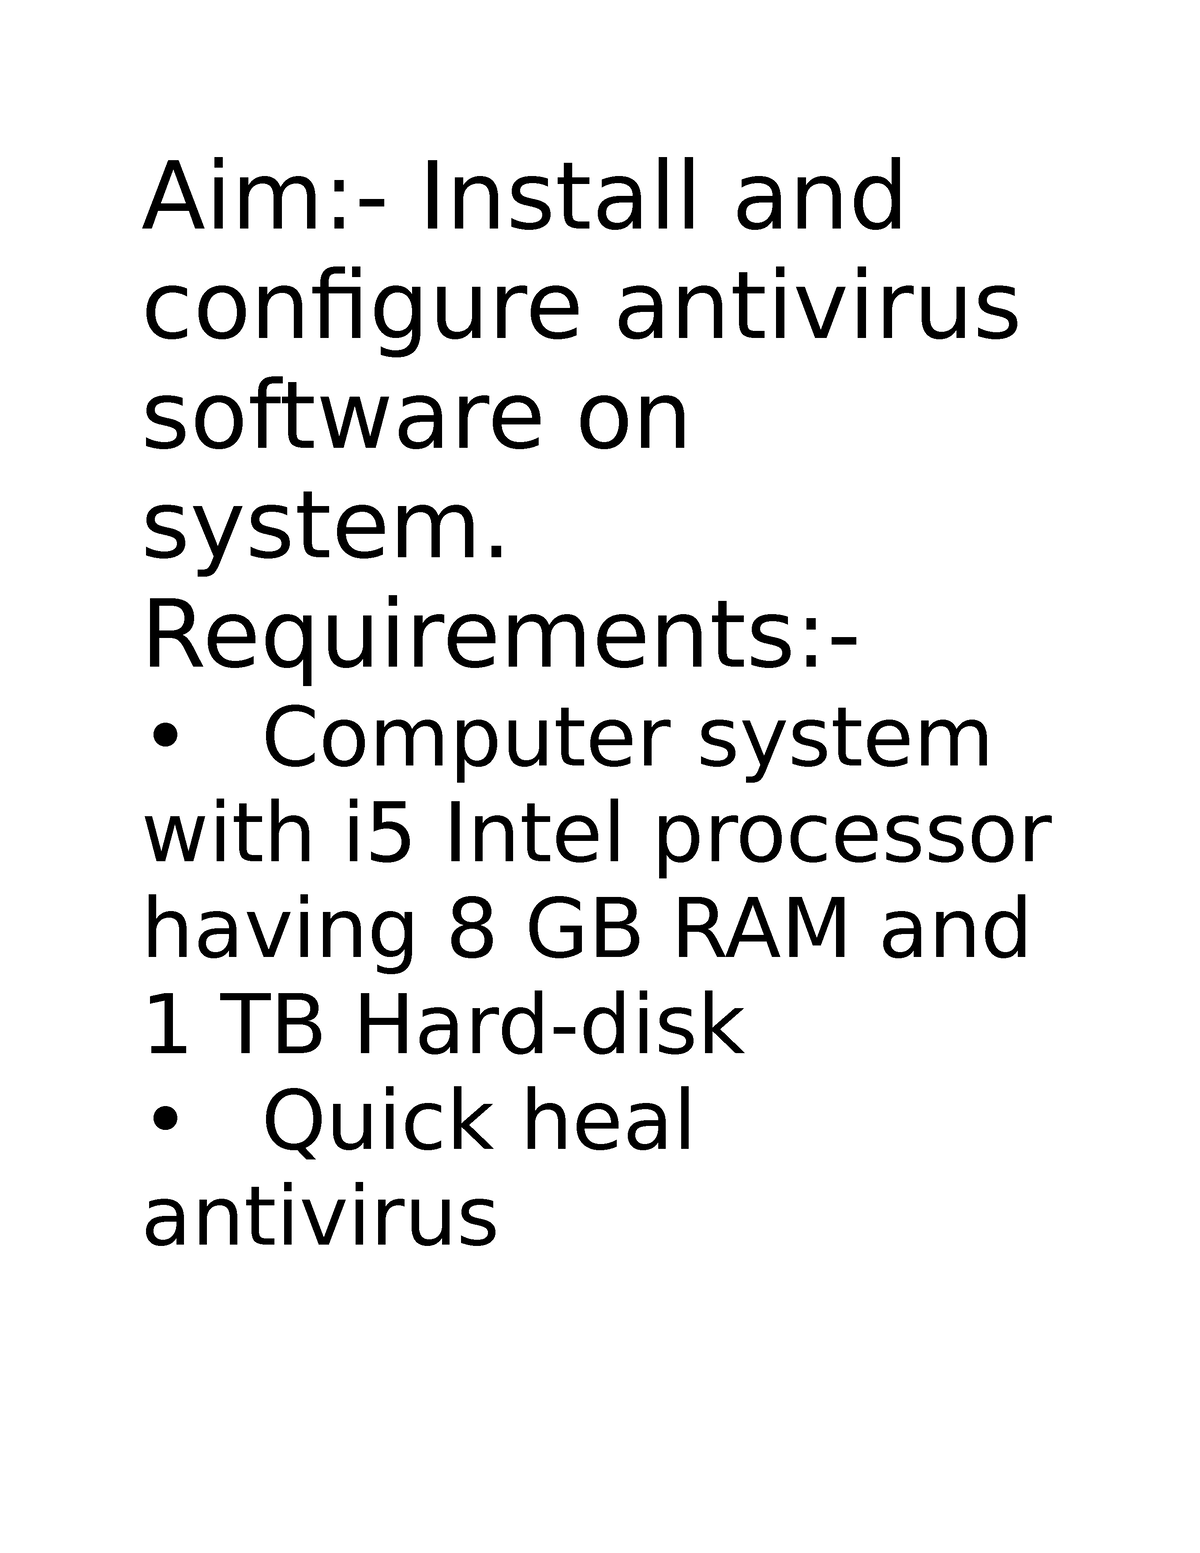 Nis Practical On Thee Given Pratical Aim Install And Configure Antivirus Software On System 9379